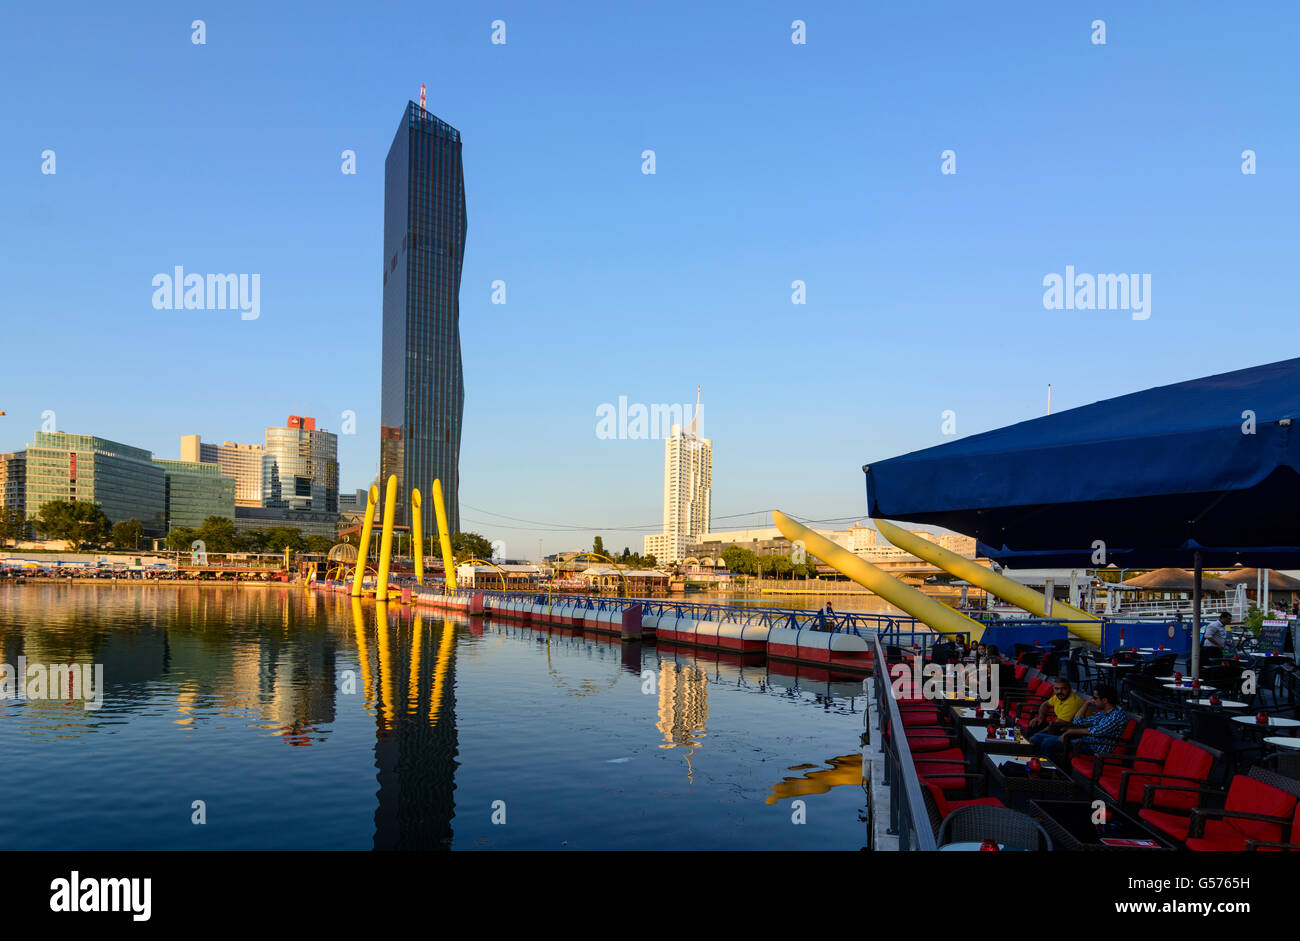 DC Tower 1, Donaucity, restaurant areas Sunken City (front) and Copa Cagrana at the New Danube, Wien, Vienna, Austria, Wien, 22. Stock Photo